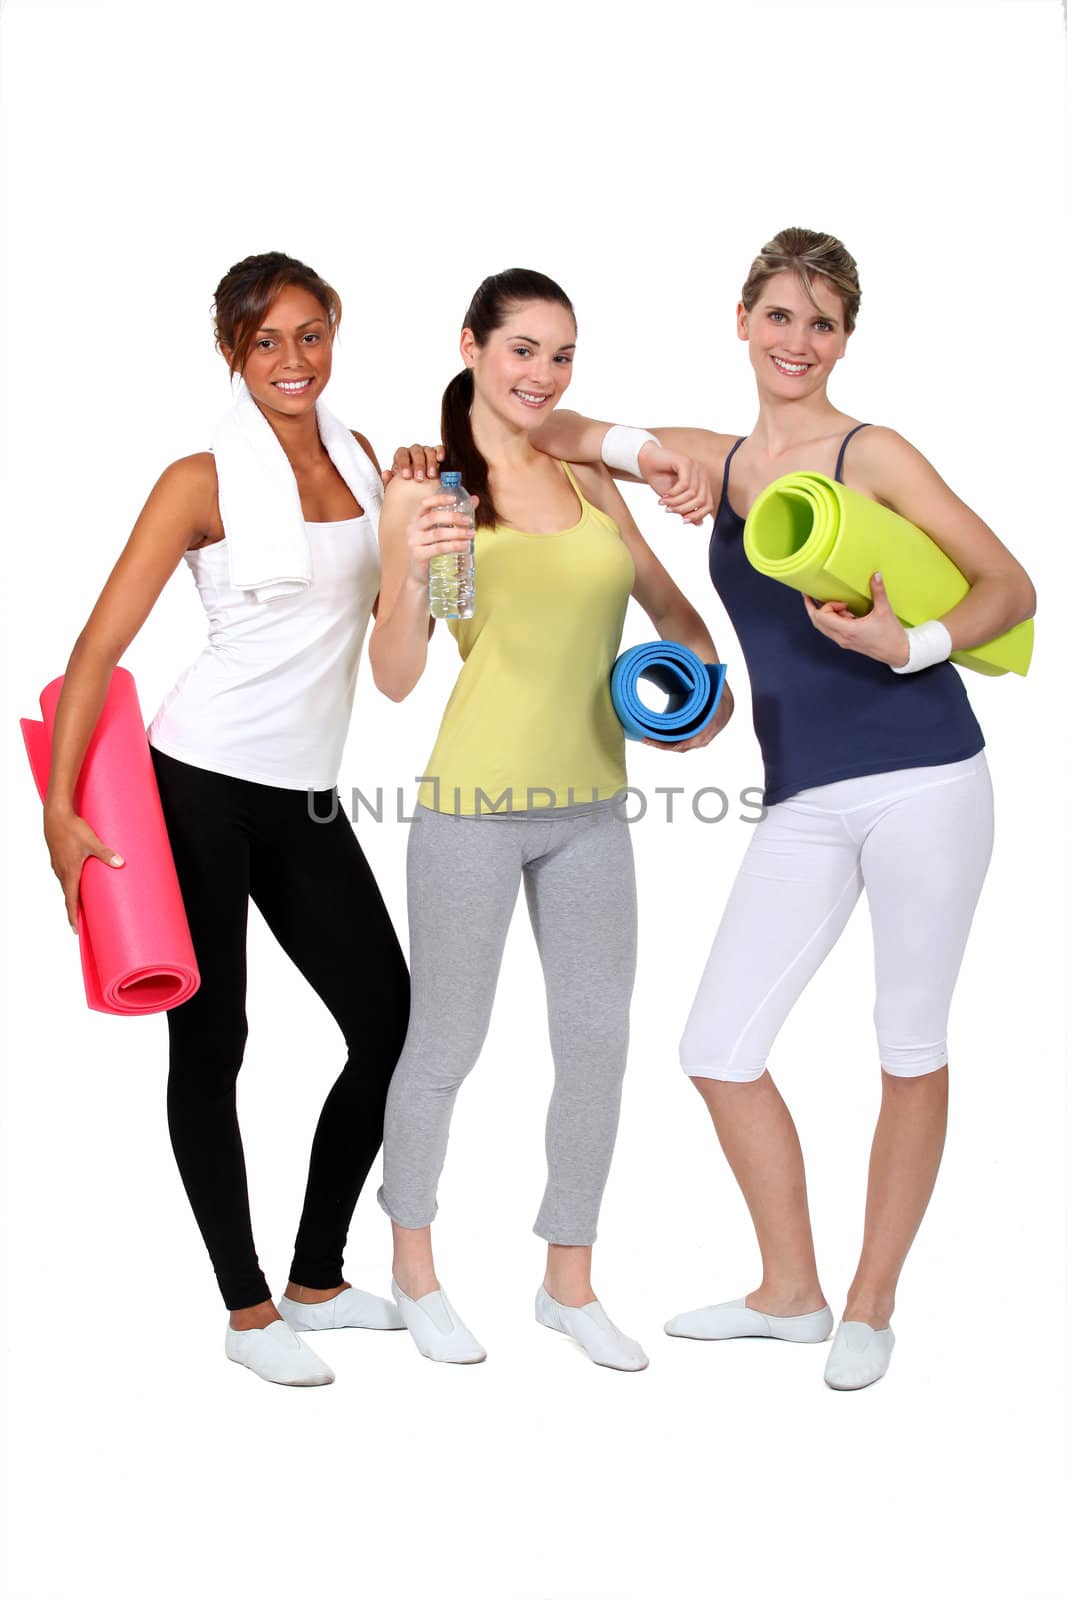 Young women ready for their gym class by phovoir